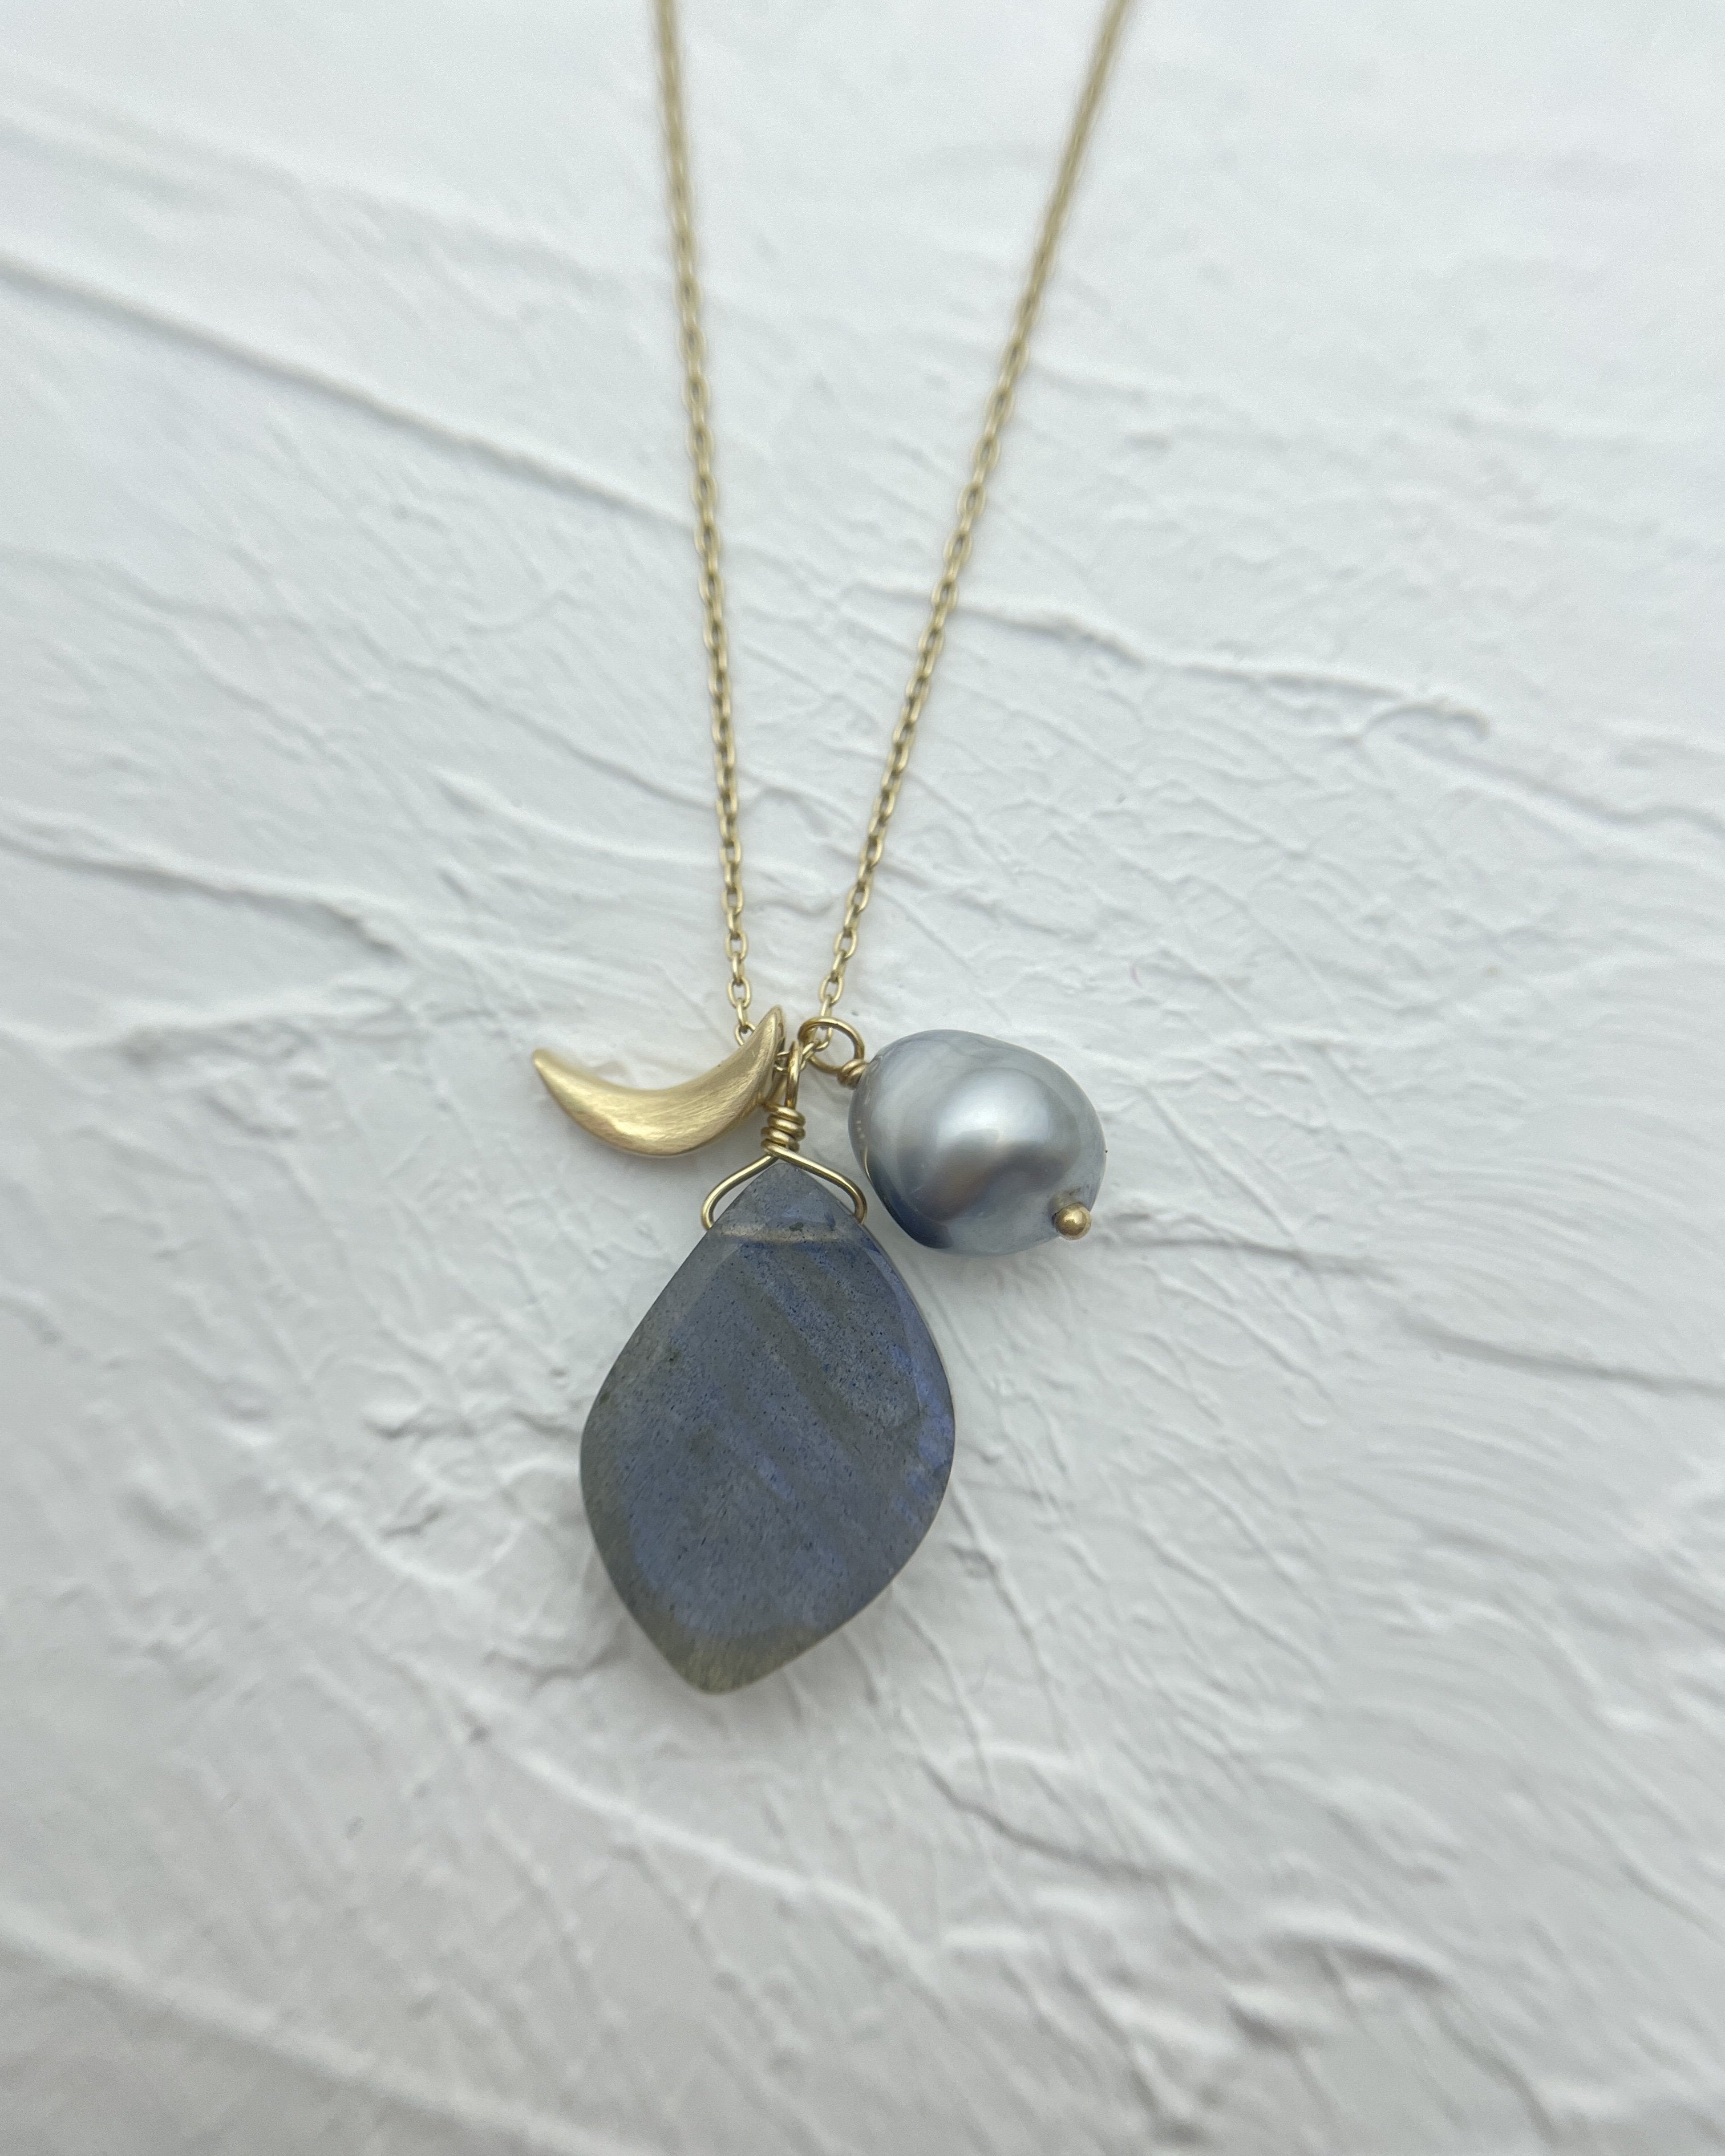 Three Charms, Moon, Labradorite and a Tahitian Pearl Necklace (10k)